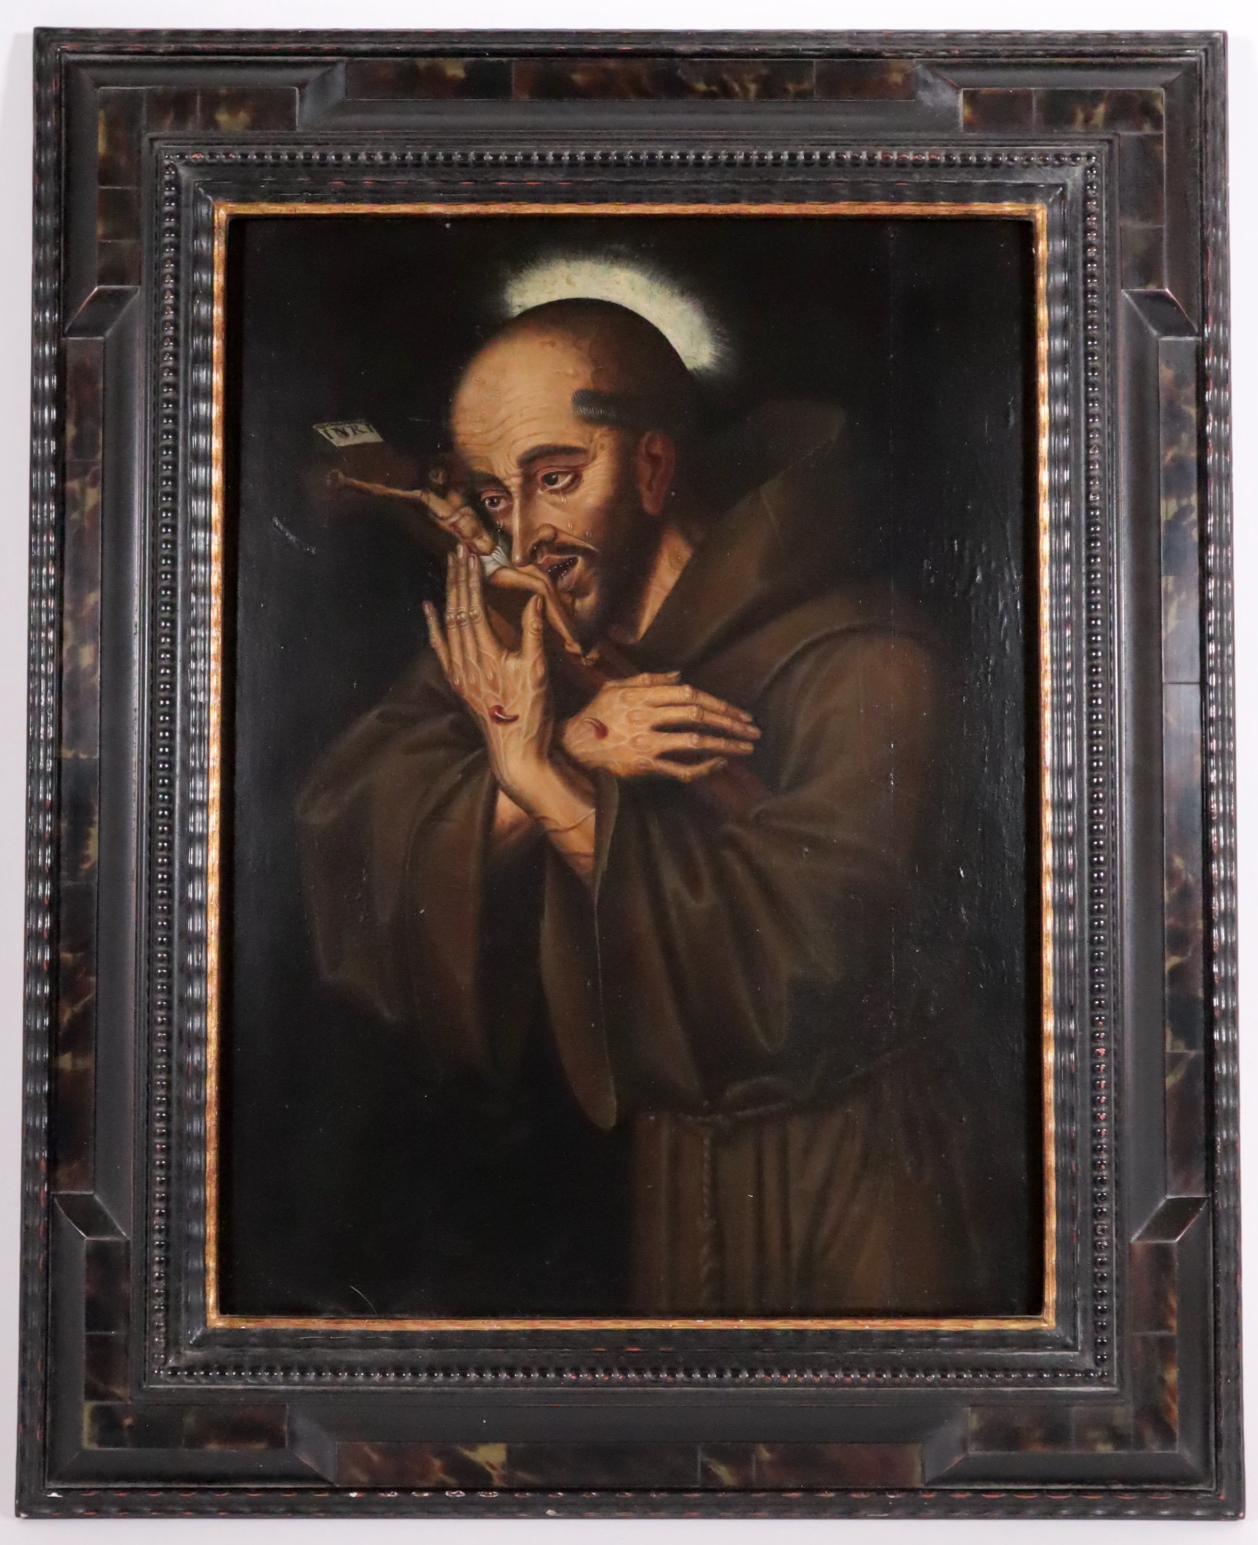 Unknown Figurative Painting - Last chance clearance sale. Spanish painting of Saint Francis in tearful ecstasy